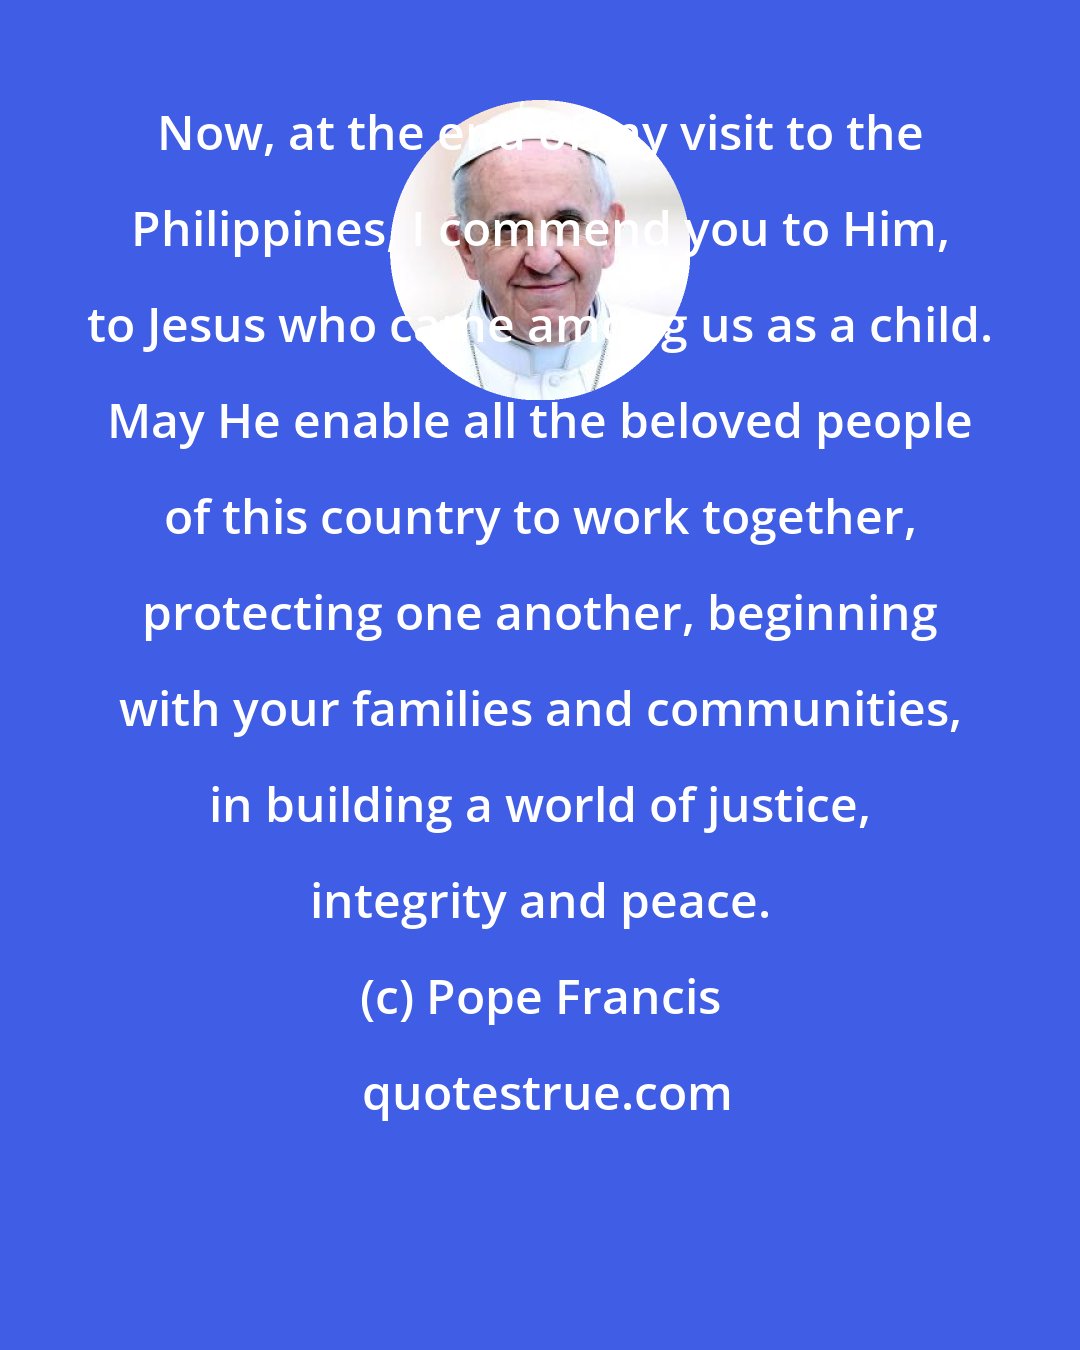 Pope Francis: Now, at the end of my visit to the Philippines, I commend you to Him, to Jesus who came among us as a child. May He enable all the beloved people of this country to work together, protecting one another, beginning with your families and communities, in building a world of justice, integrity and peace.